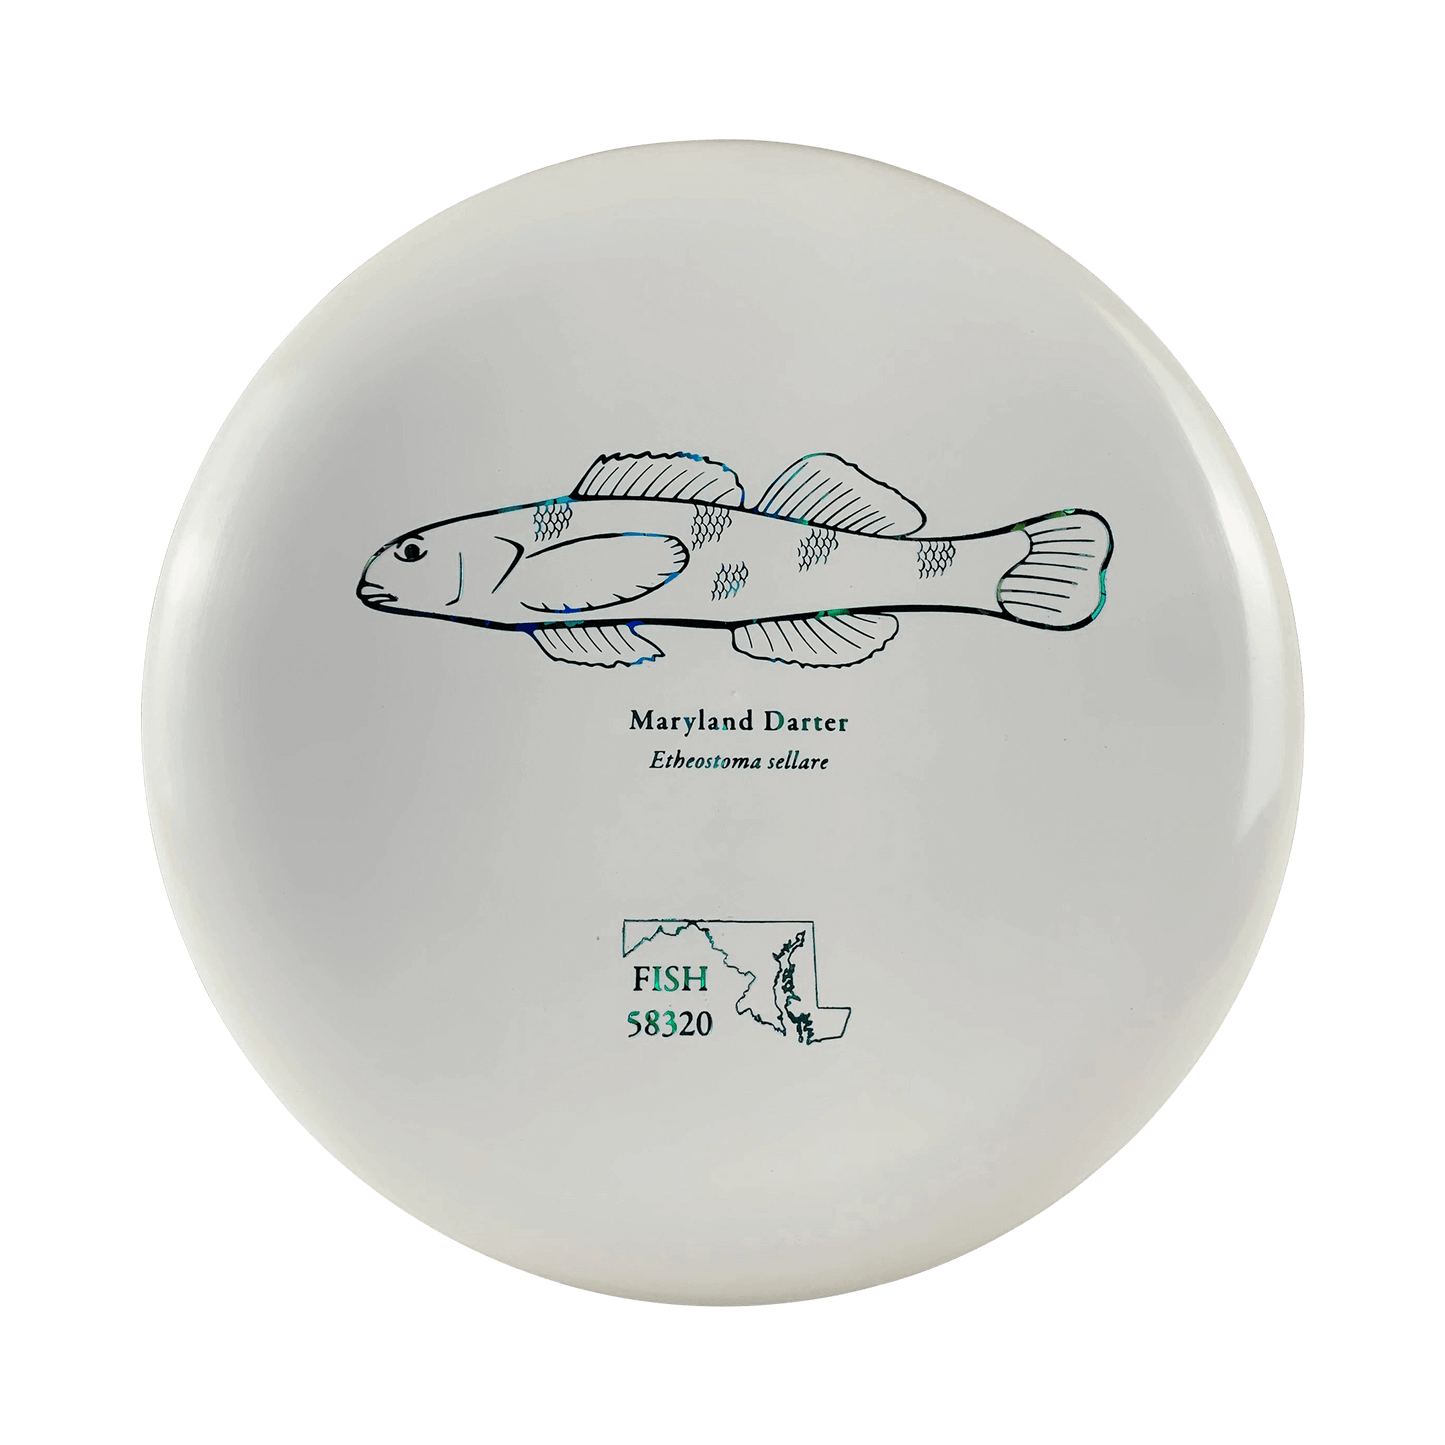 ESP Roach - Bottom Stamp Dyer's Edition Andrew Fish Maryland Darter Stamp Disc Discraft white 173 